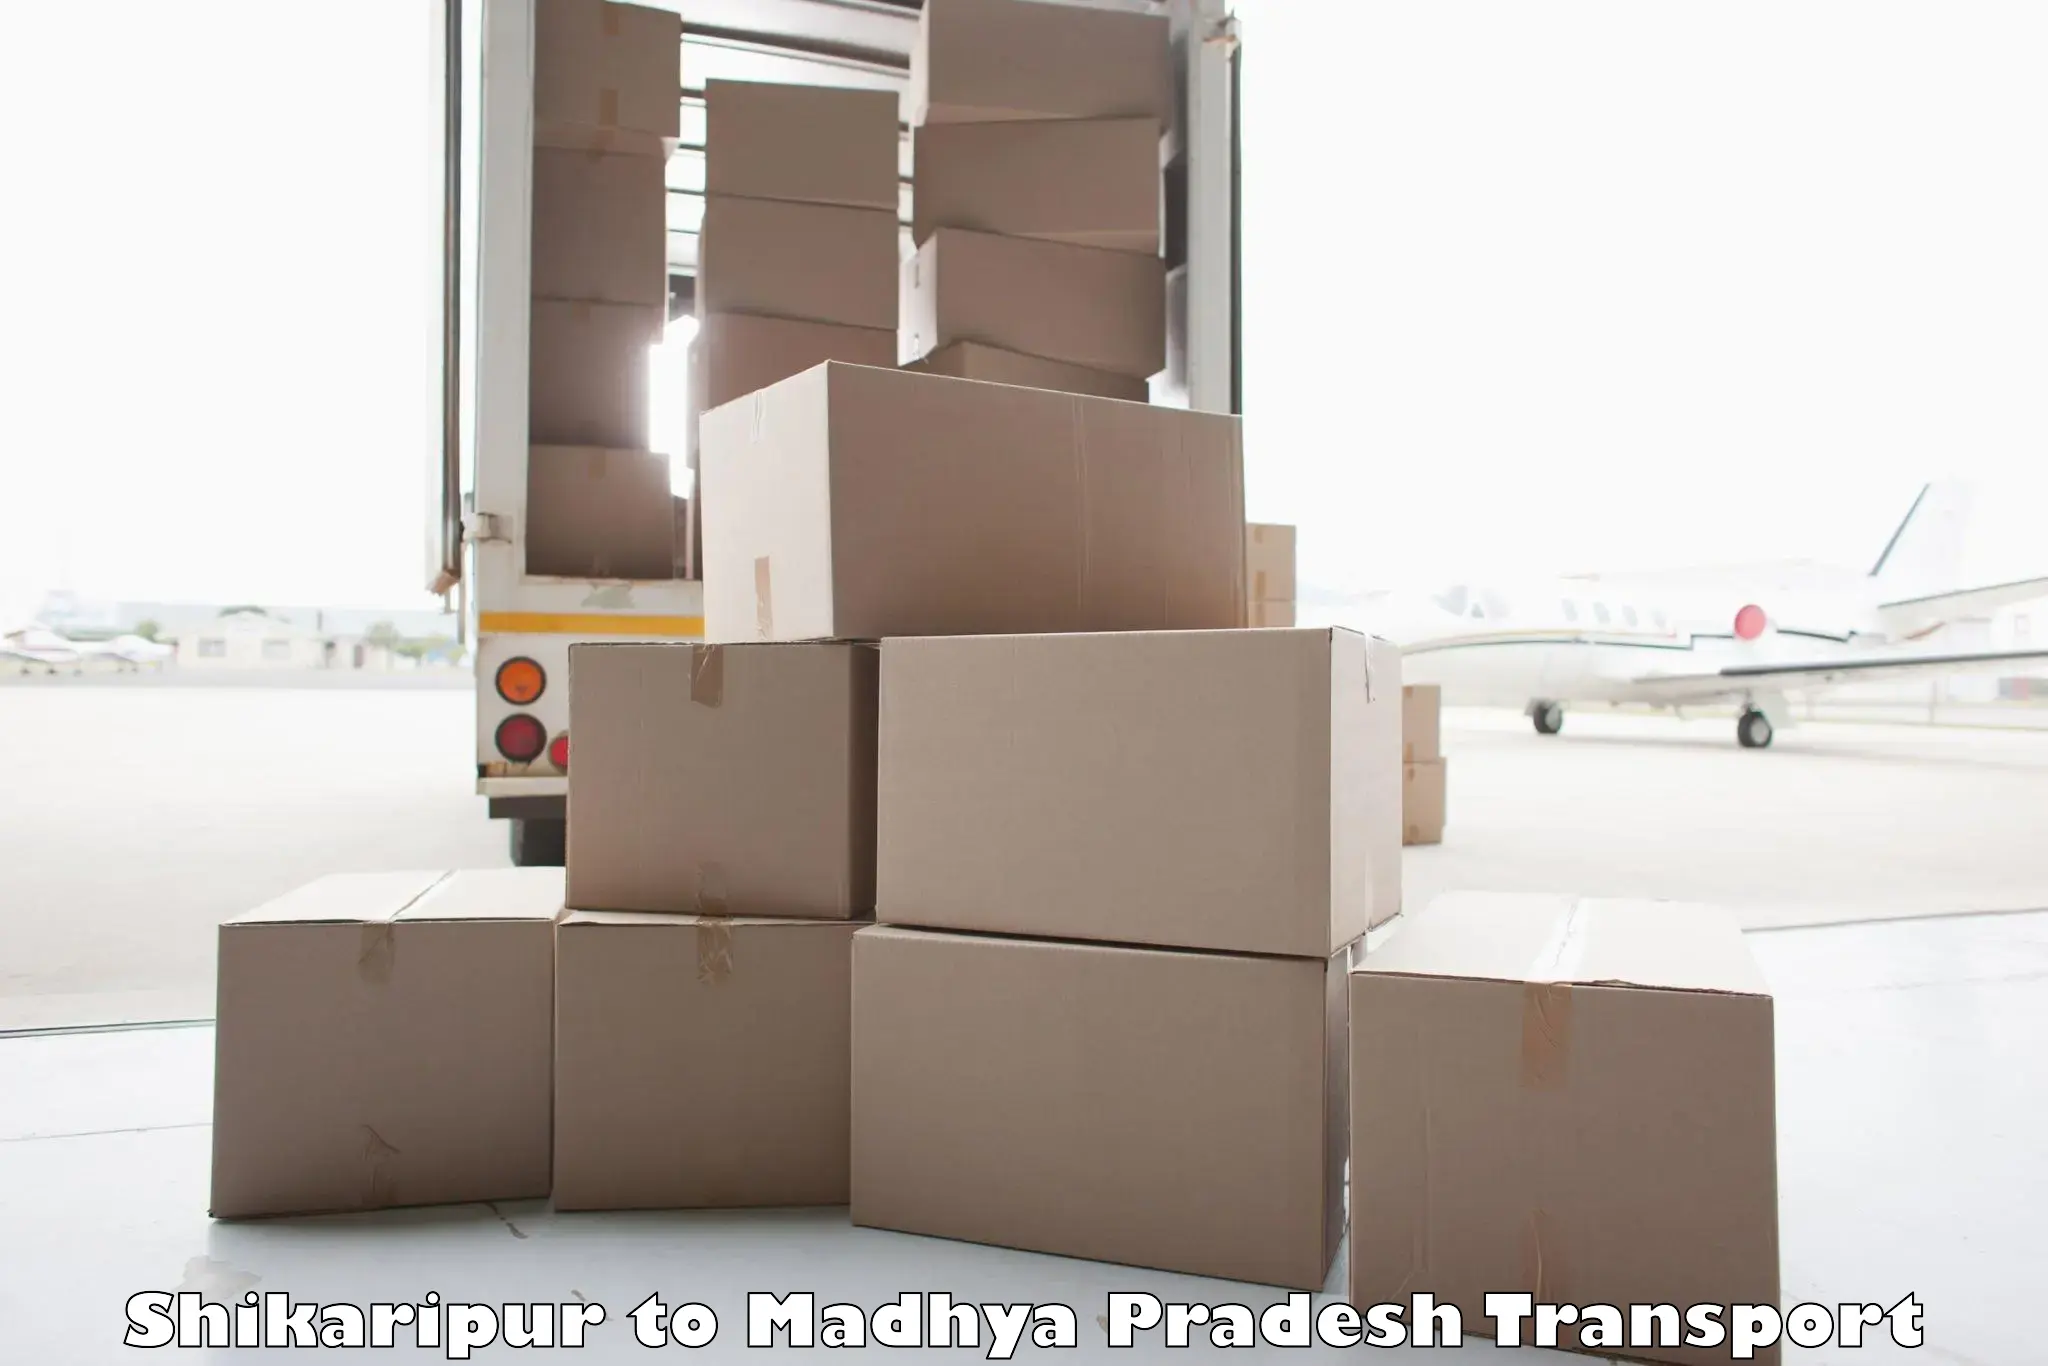 Land transport services Shikaripur to Bhopal